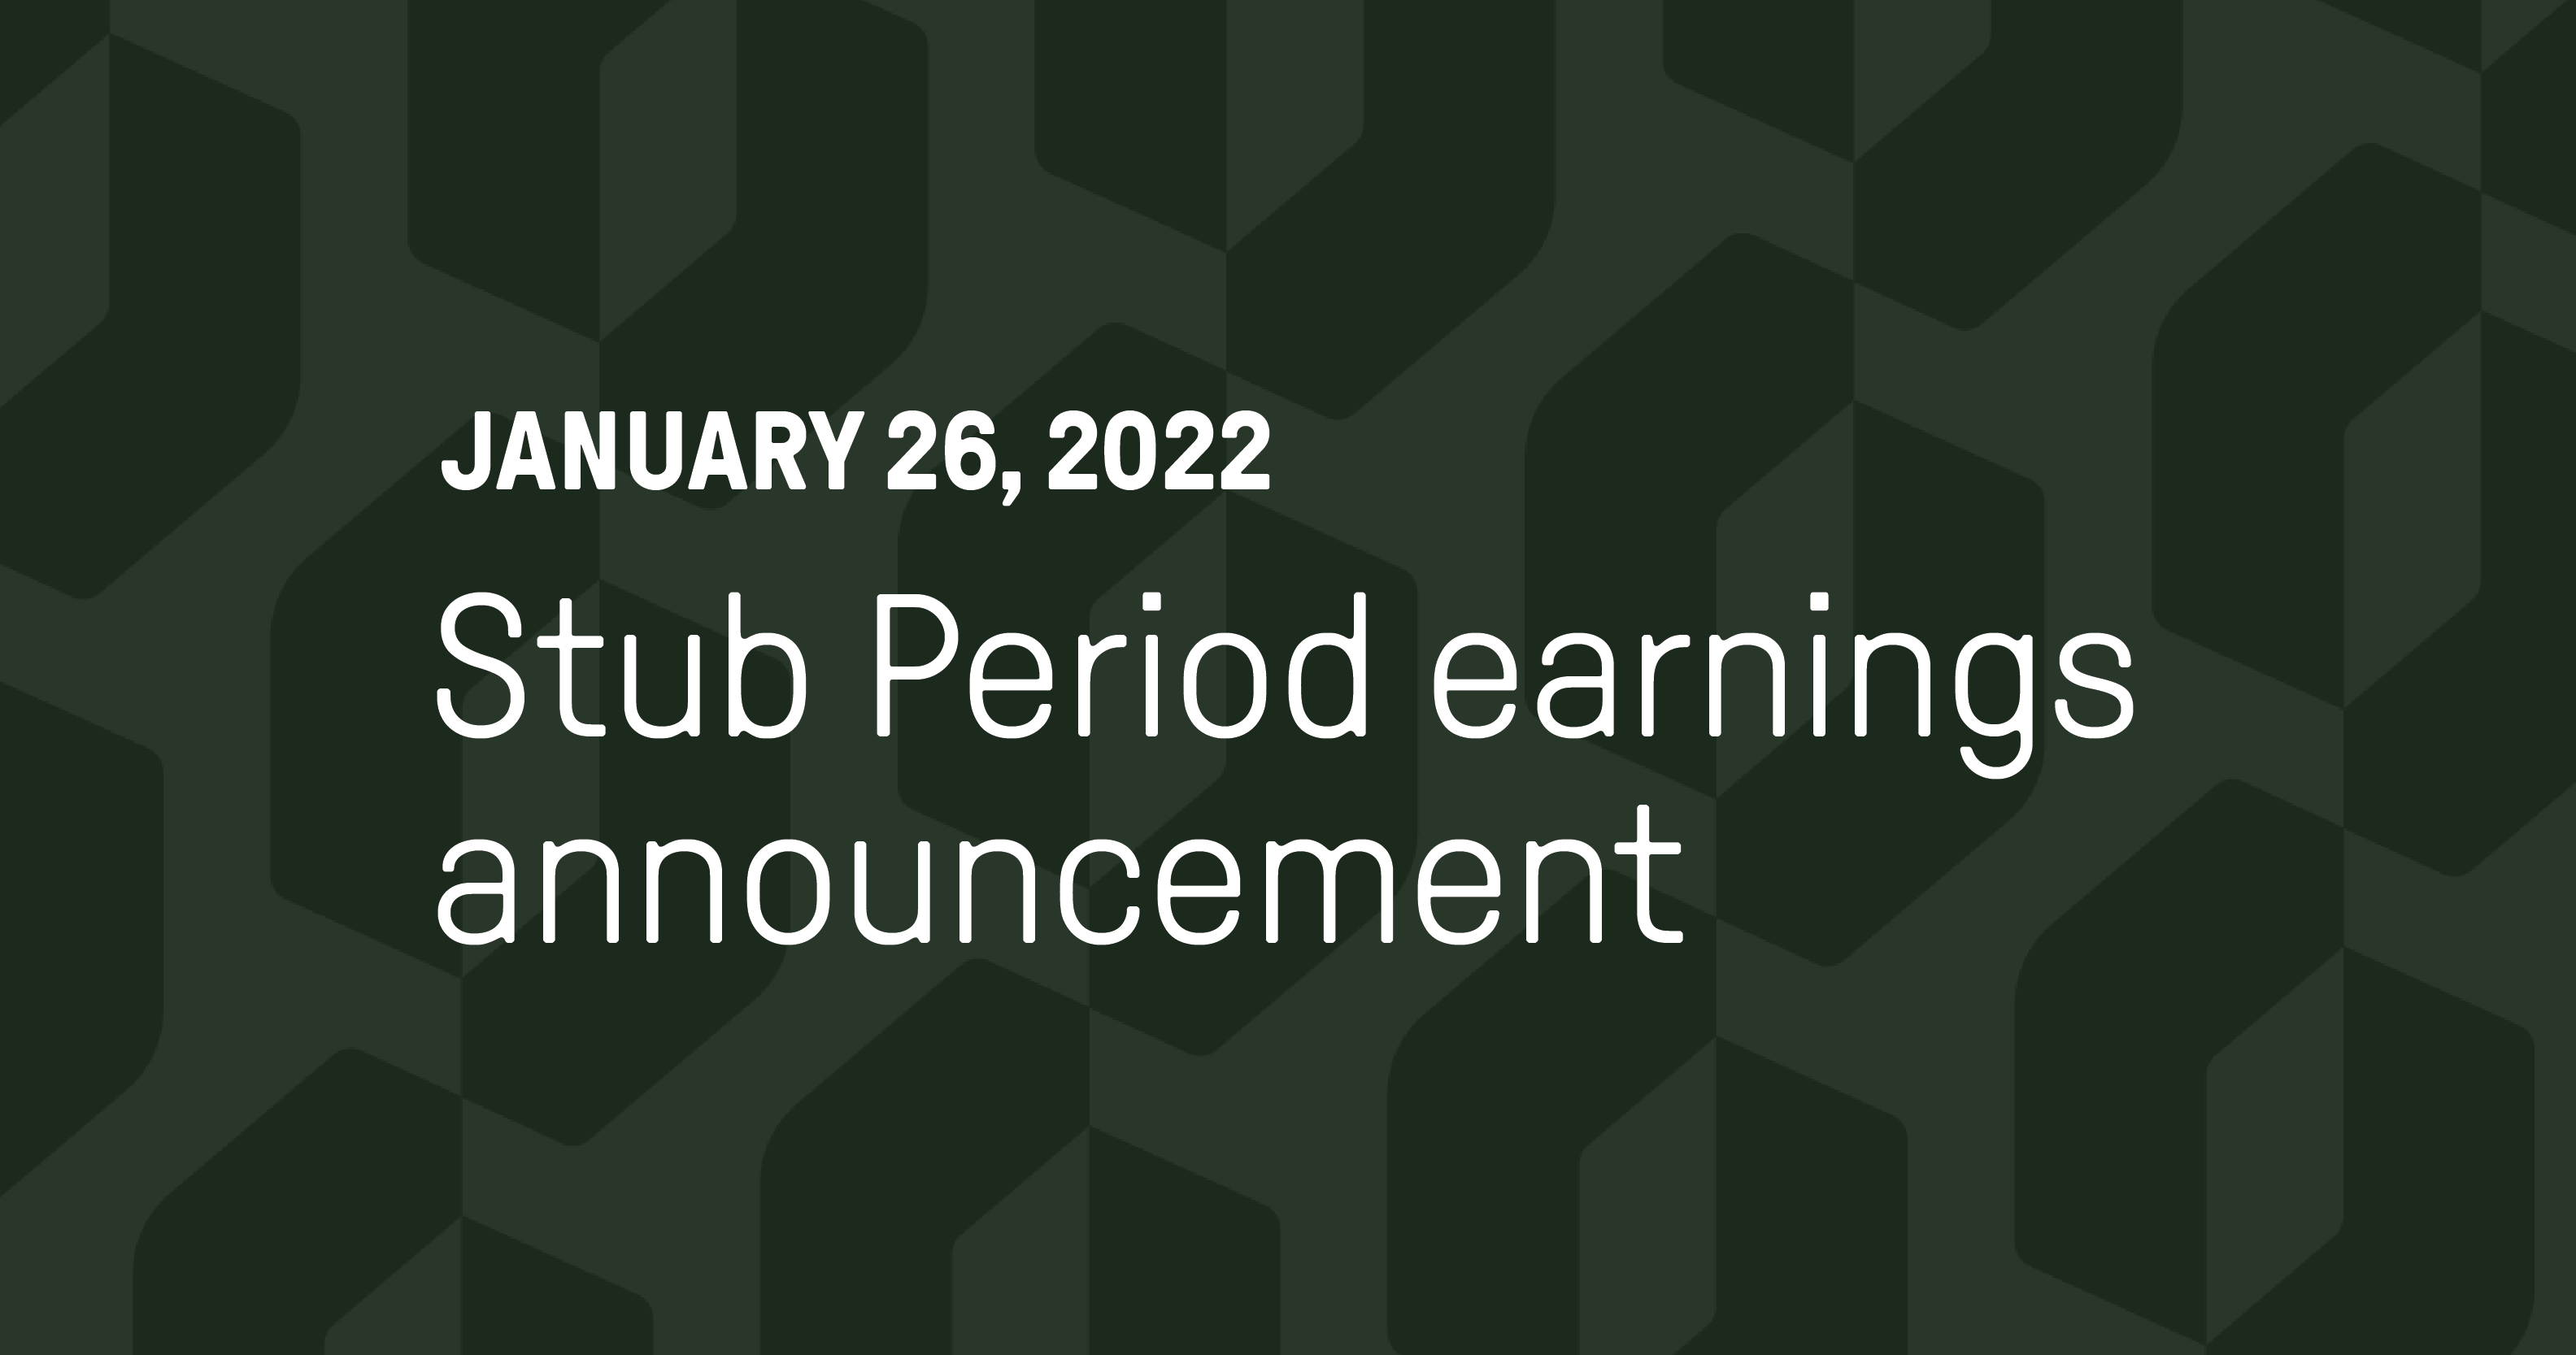 Green cropped logo background that reads January 26, 2022, Stub Period earnings announcement